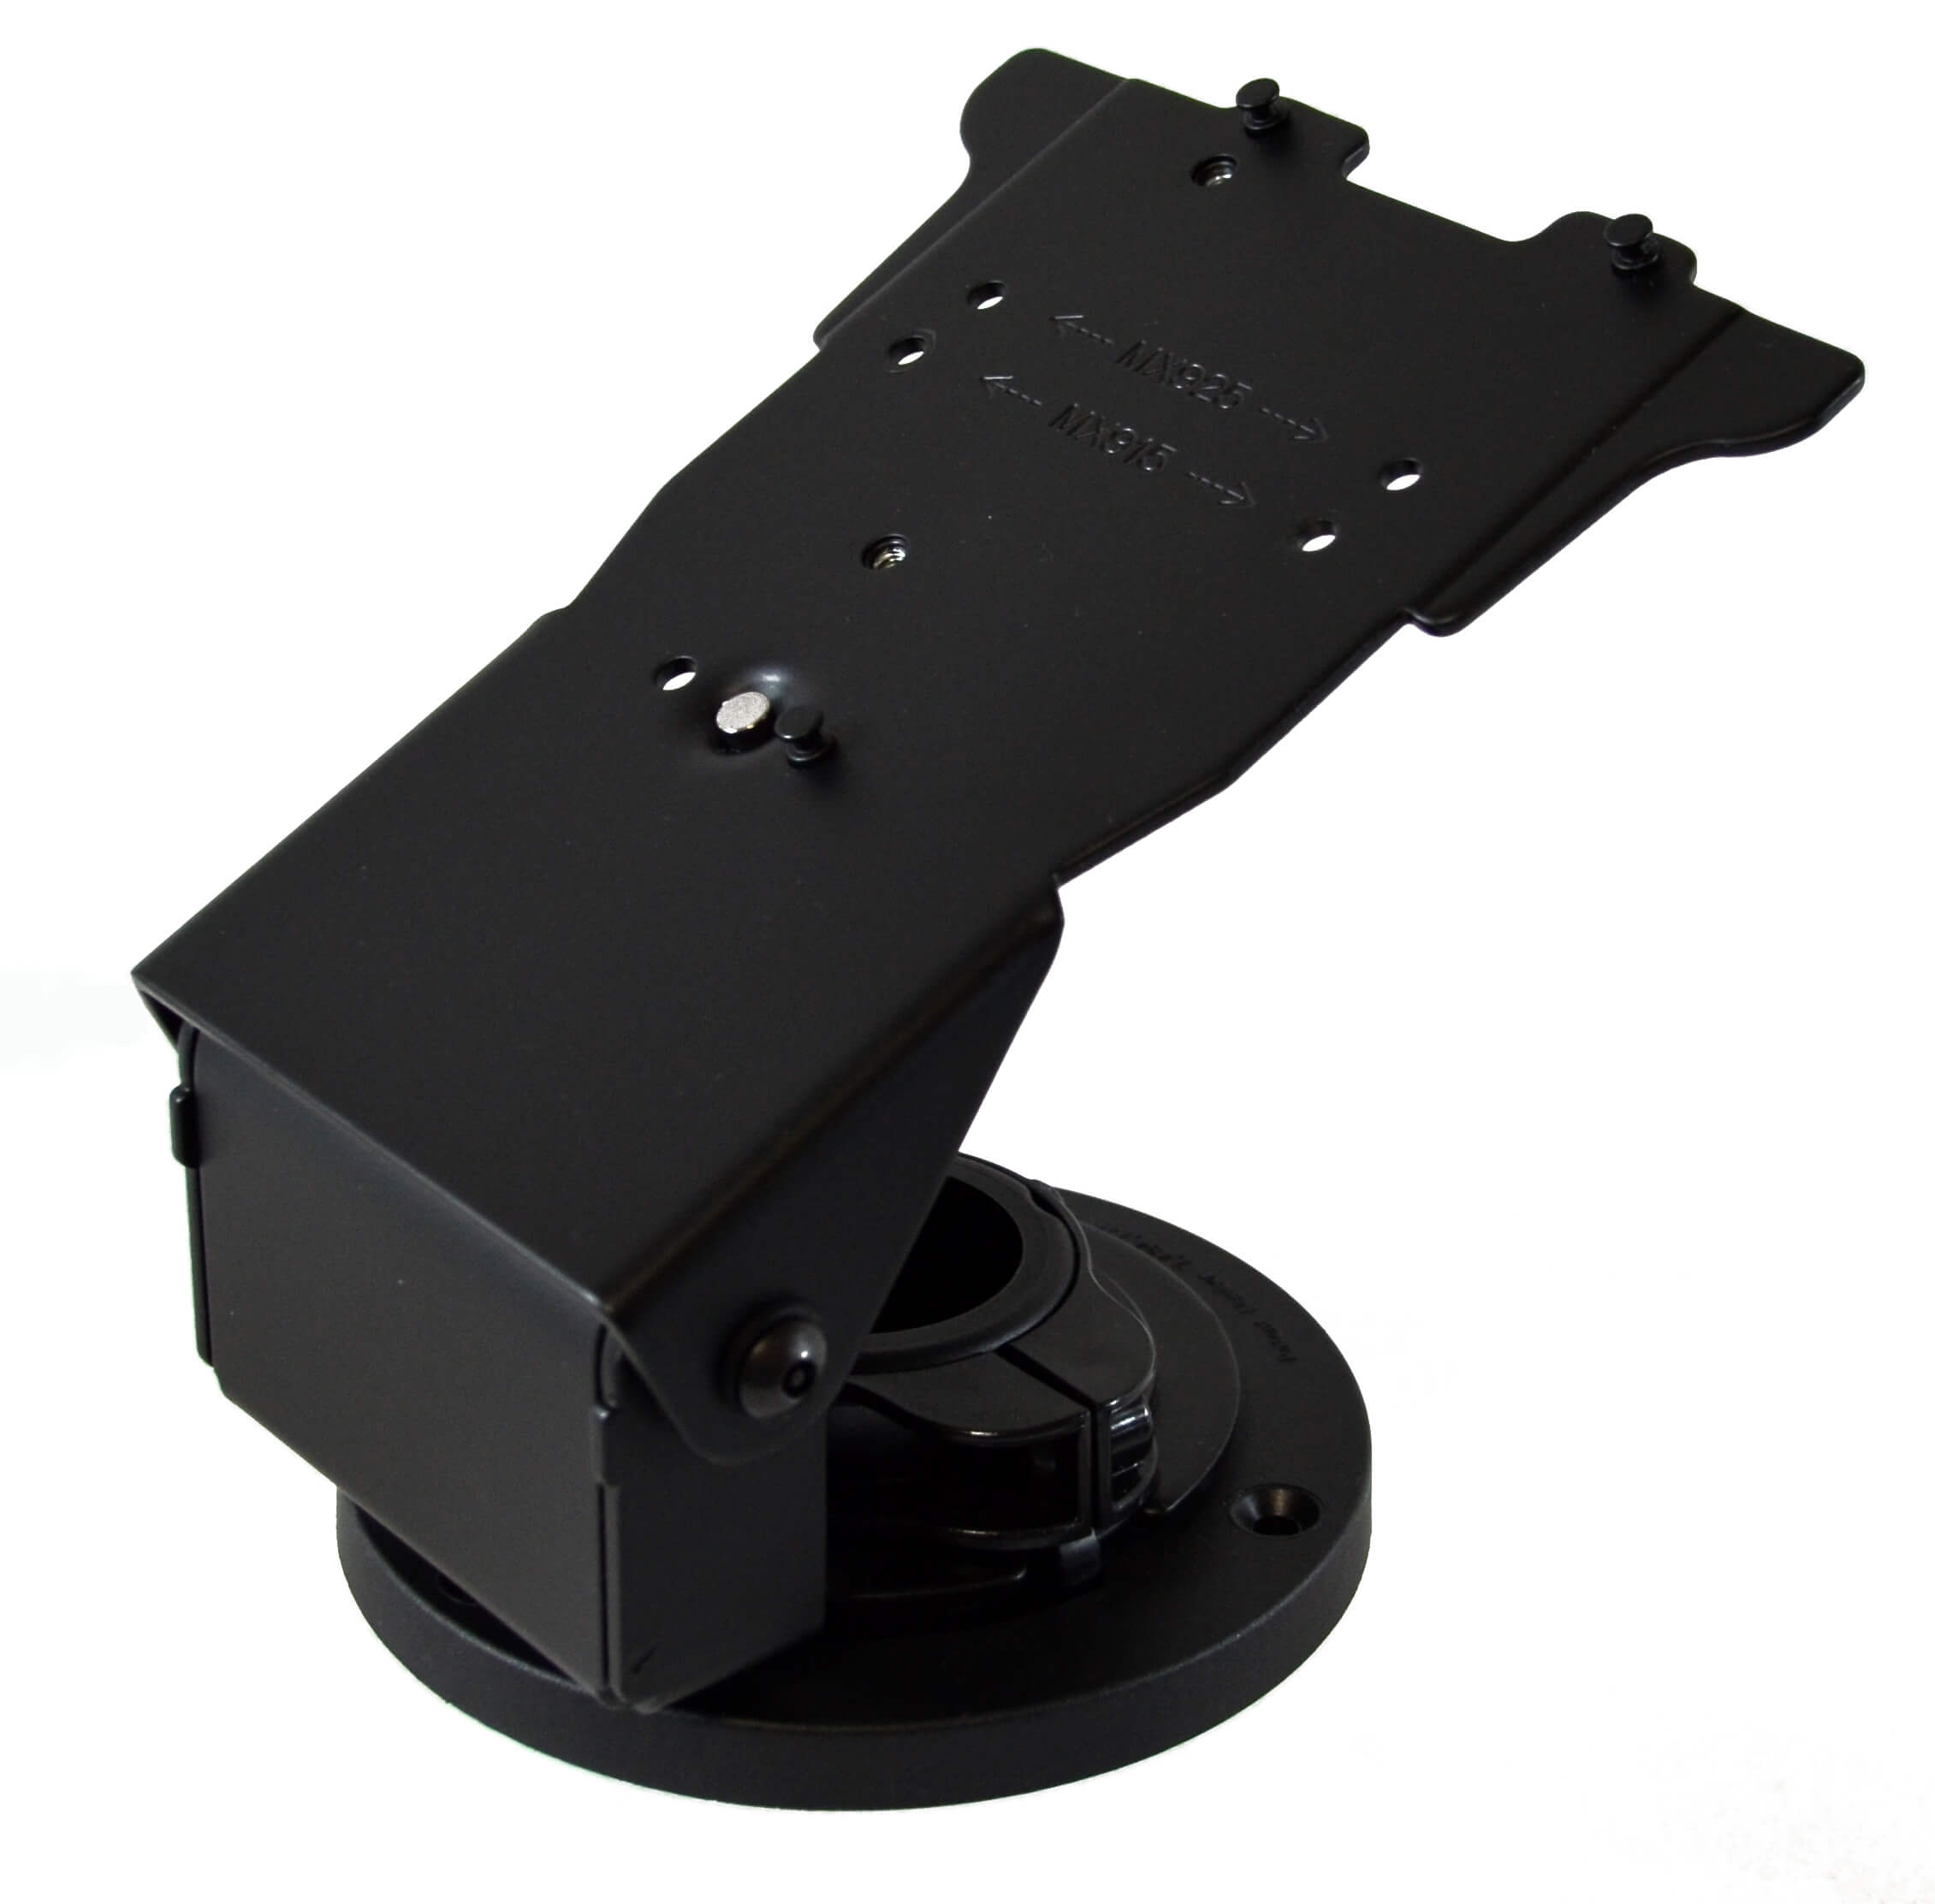 Round Base Metal Stand with EMV Card Clearance for Verifone MX915/MX925/M424/M425 Payment Terminals